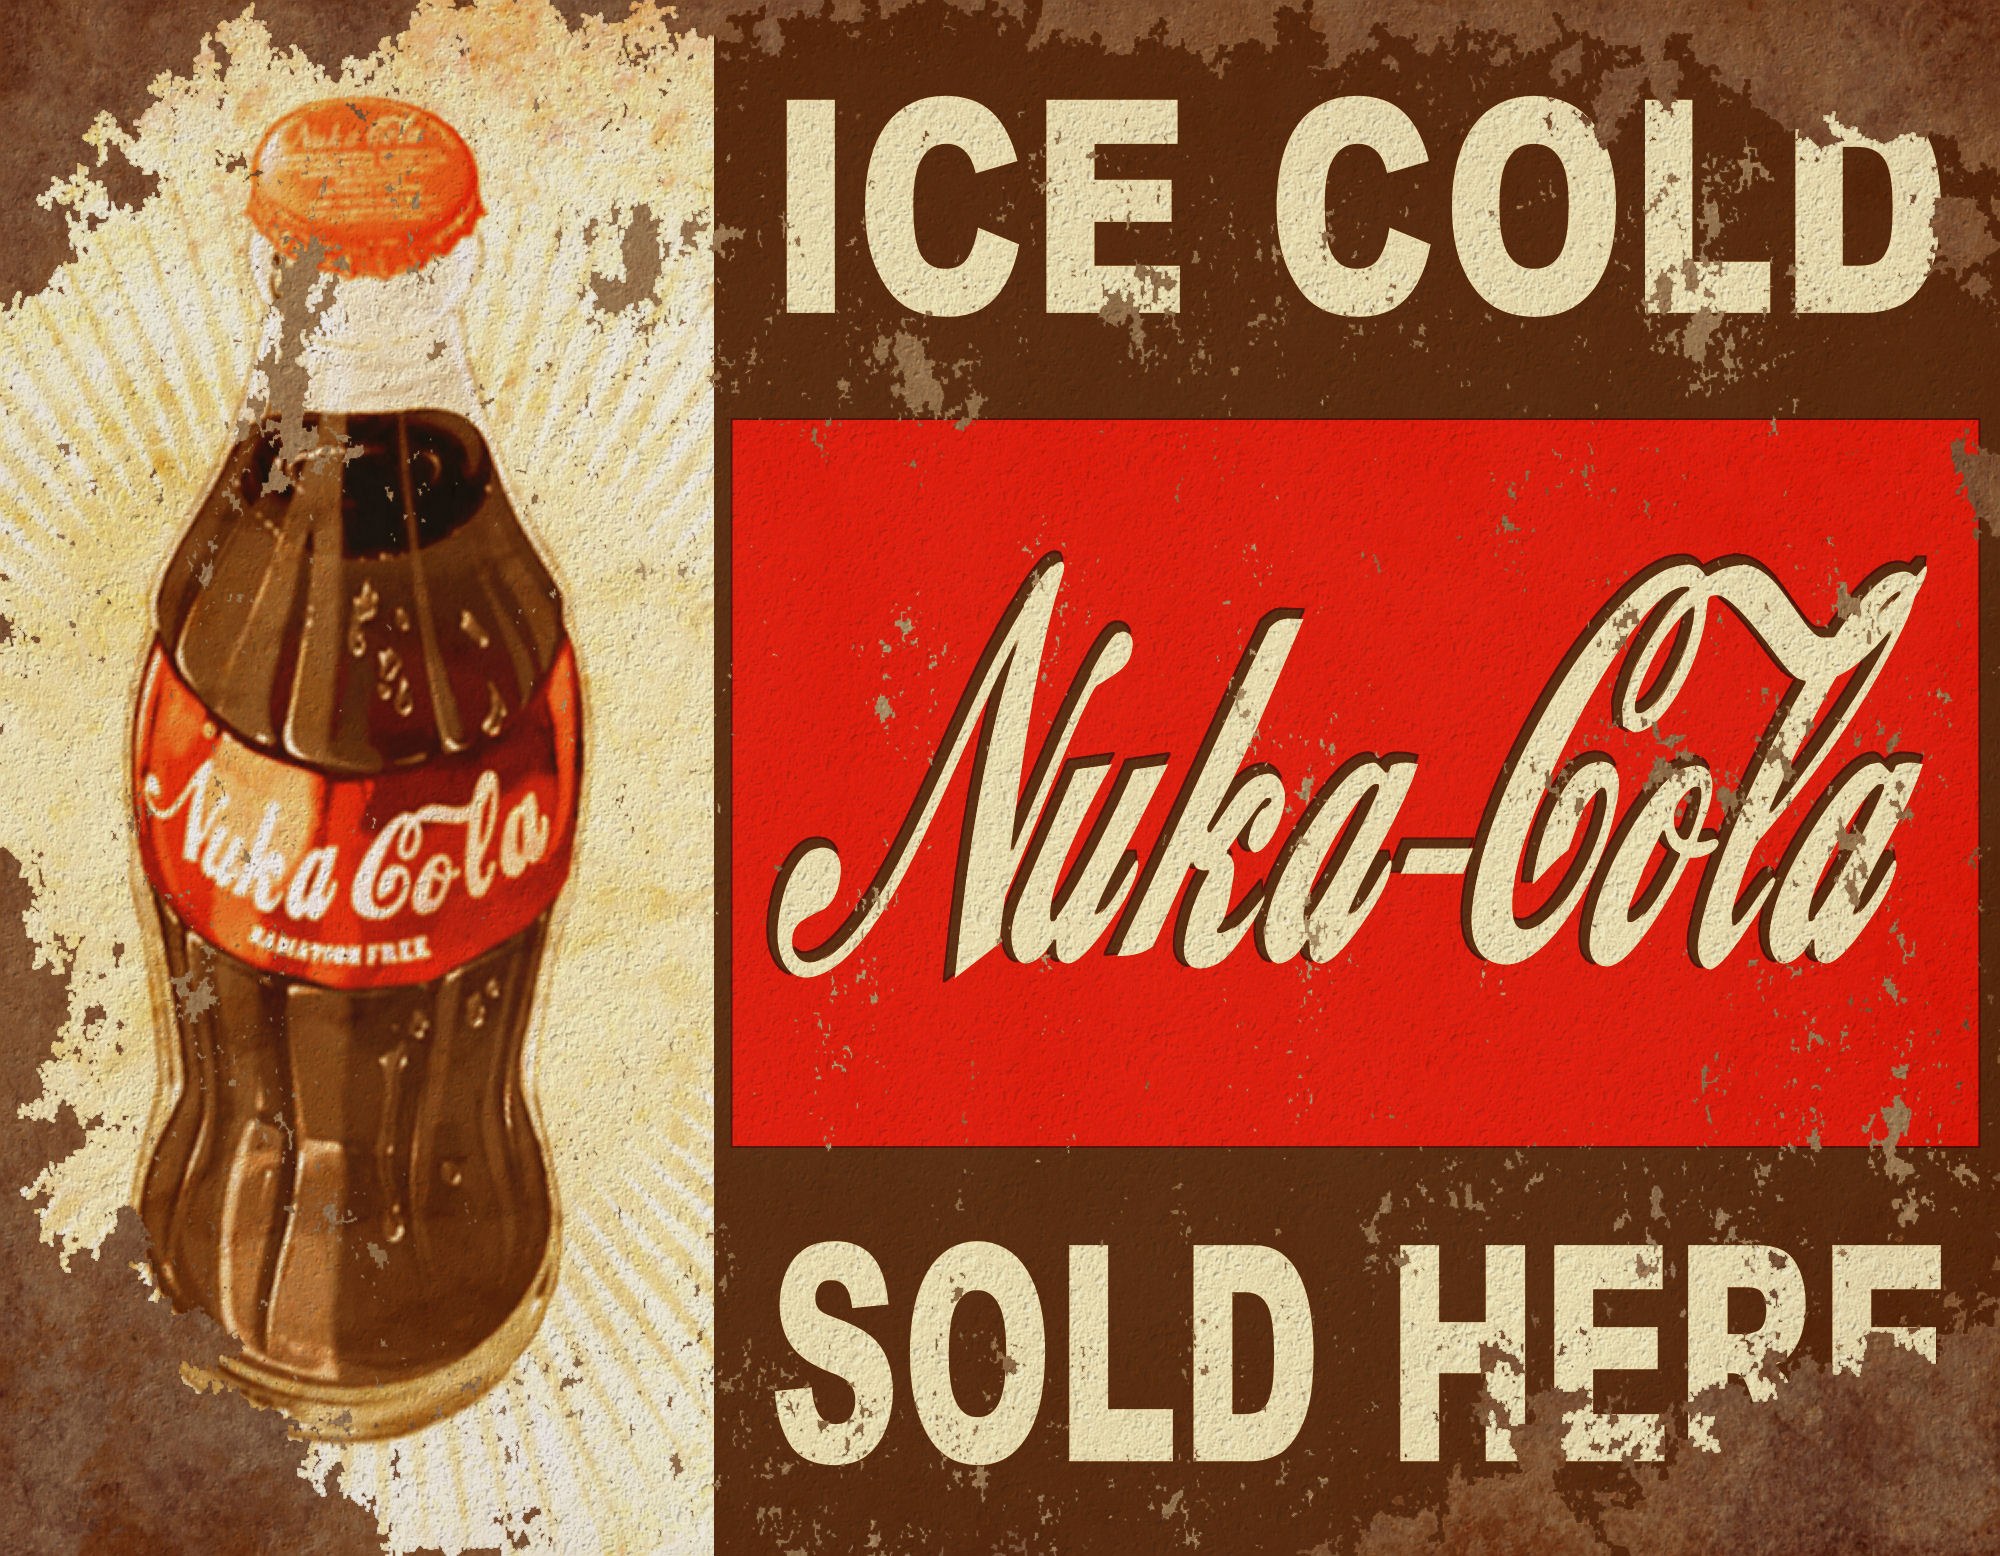 Rusty Nuka Cola sign - a vintage, weathered sign displaying the iconic Nuka Cola branding.